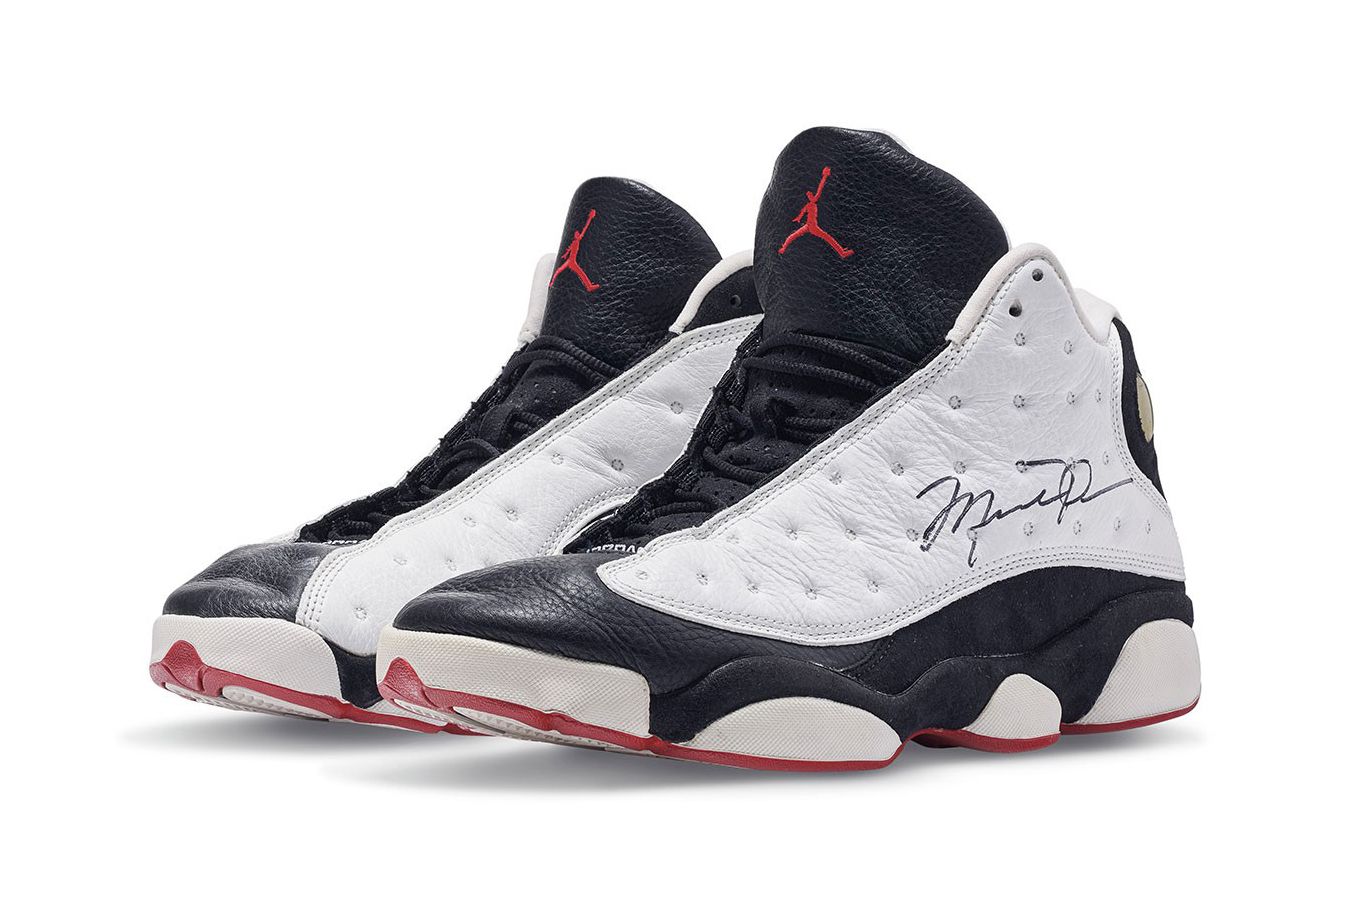 The Wick - A Pair of Michael Jordan game-worn and signed Air Jordan XIII ‘He’s Got Game’ Sneakers, Christie's 